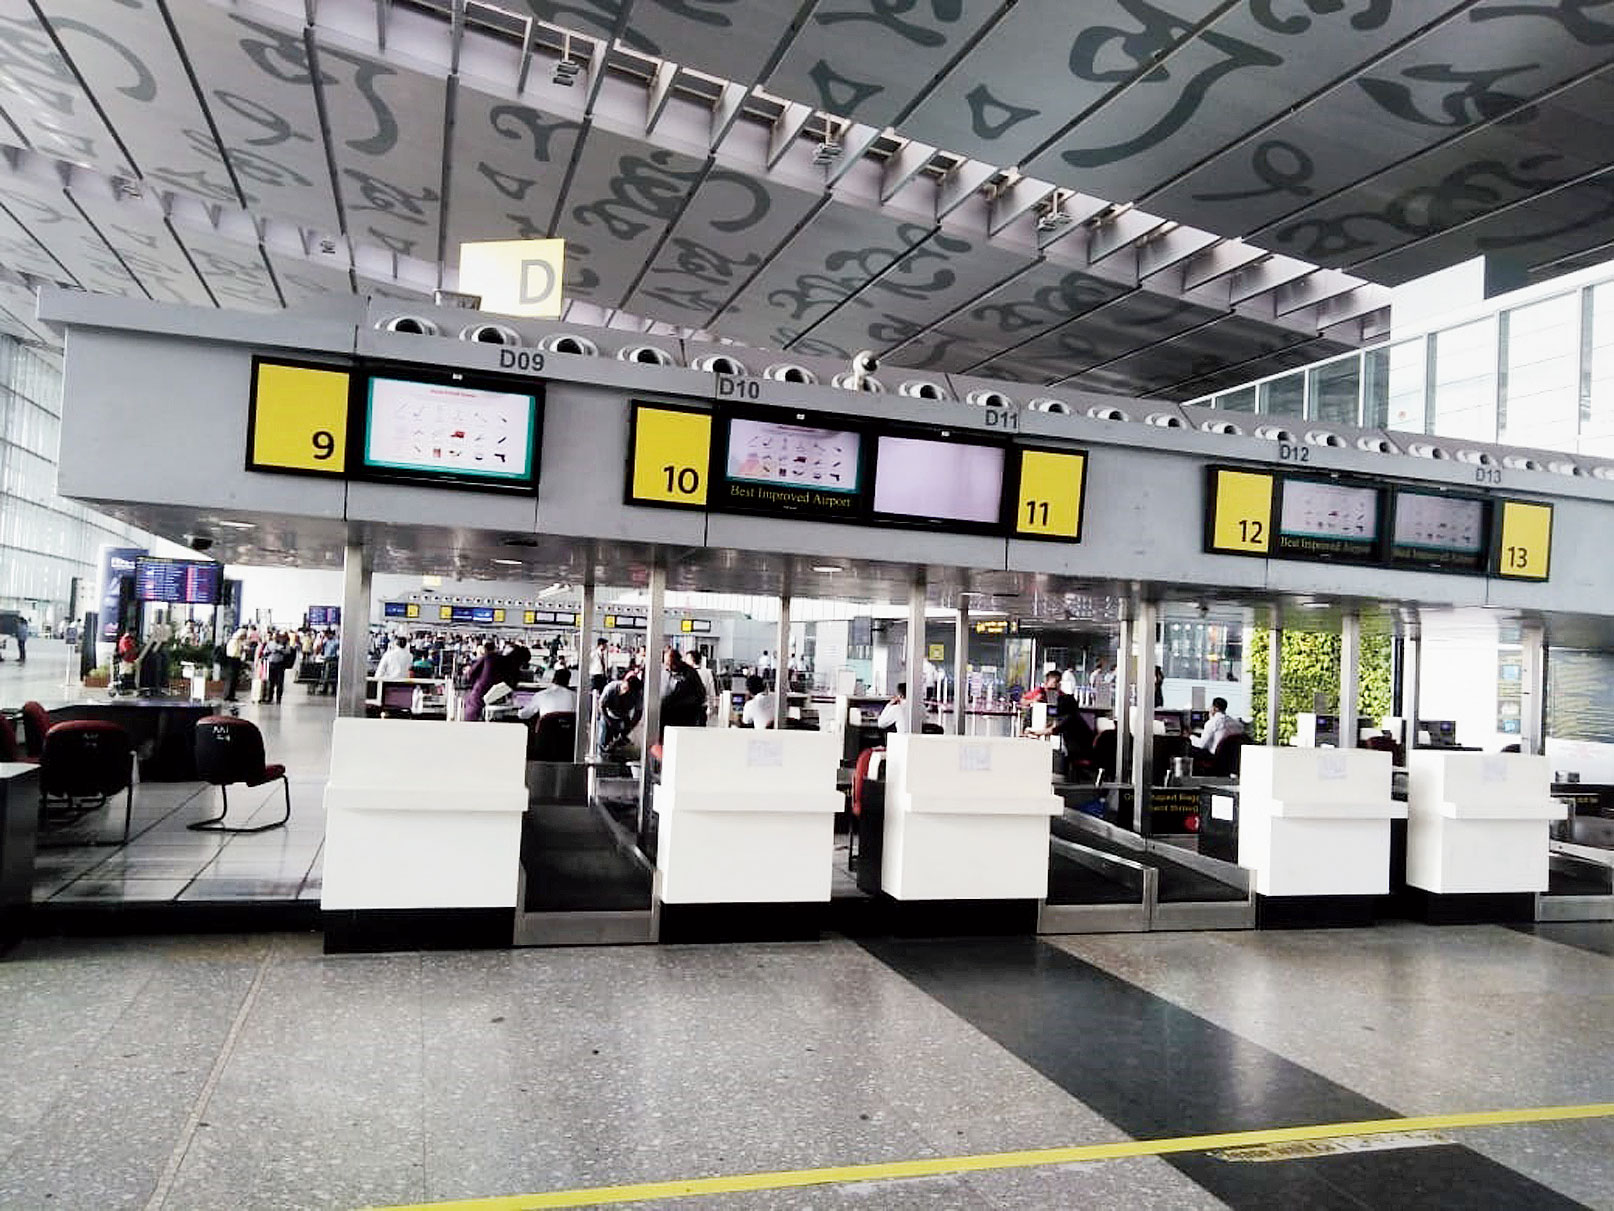 The check-in counters at the city airport that belonged to Jet Airways.
